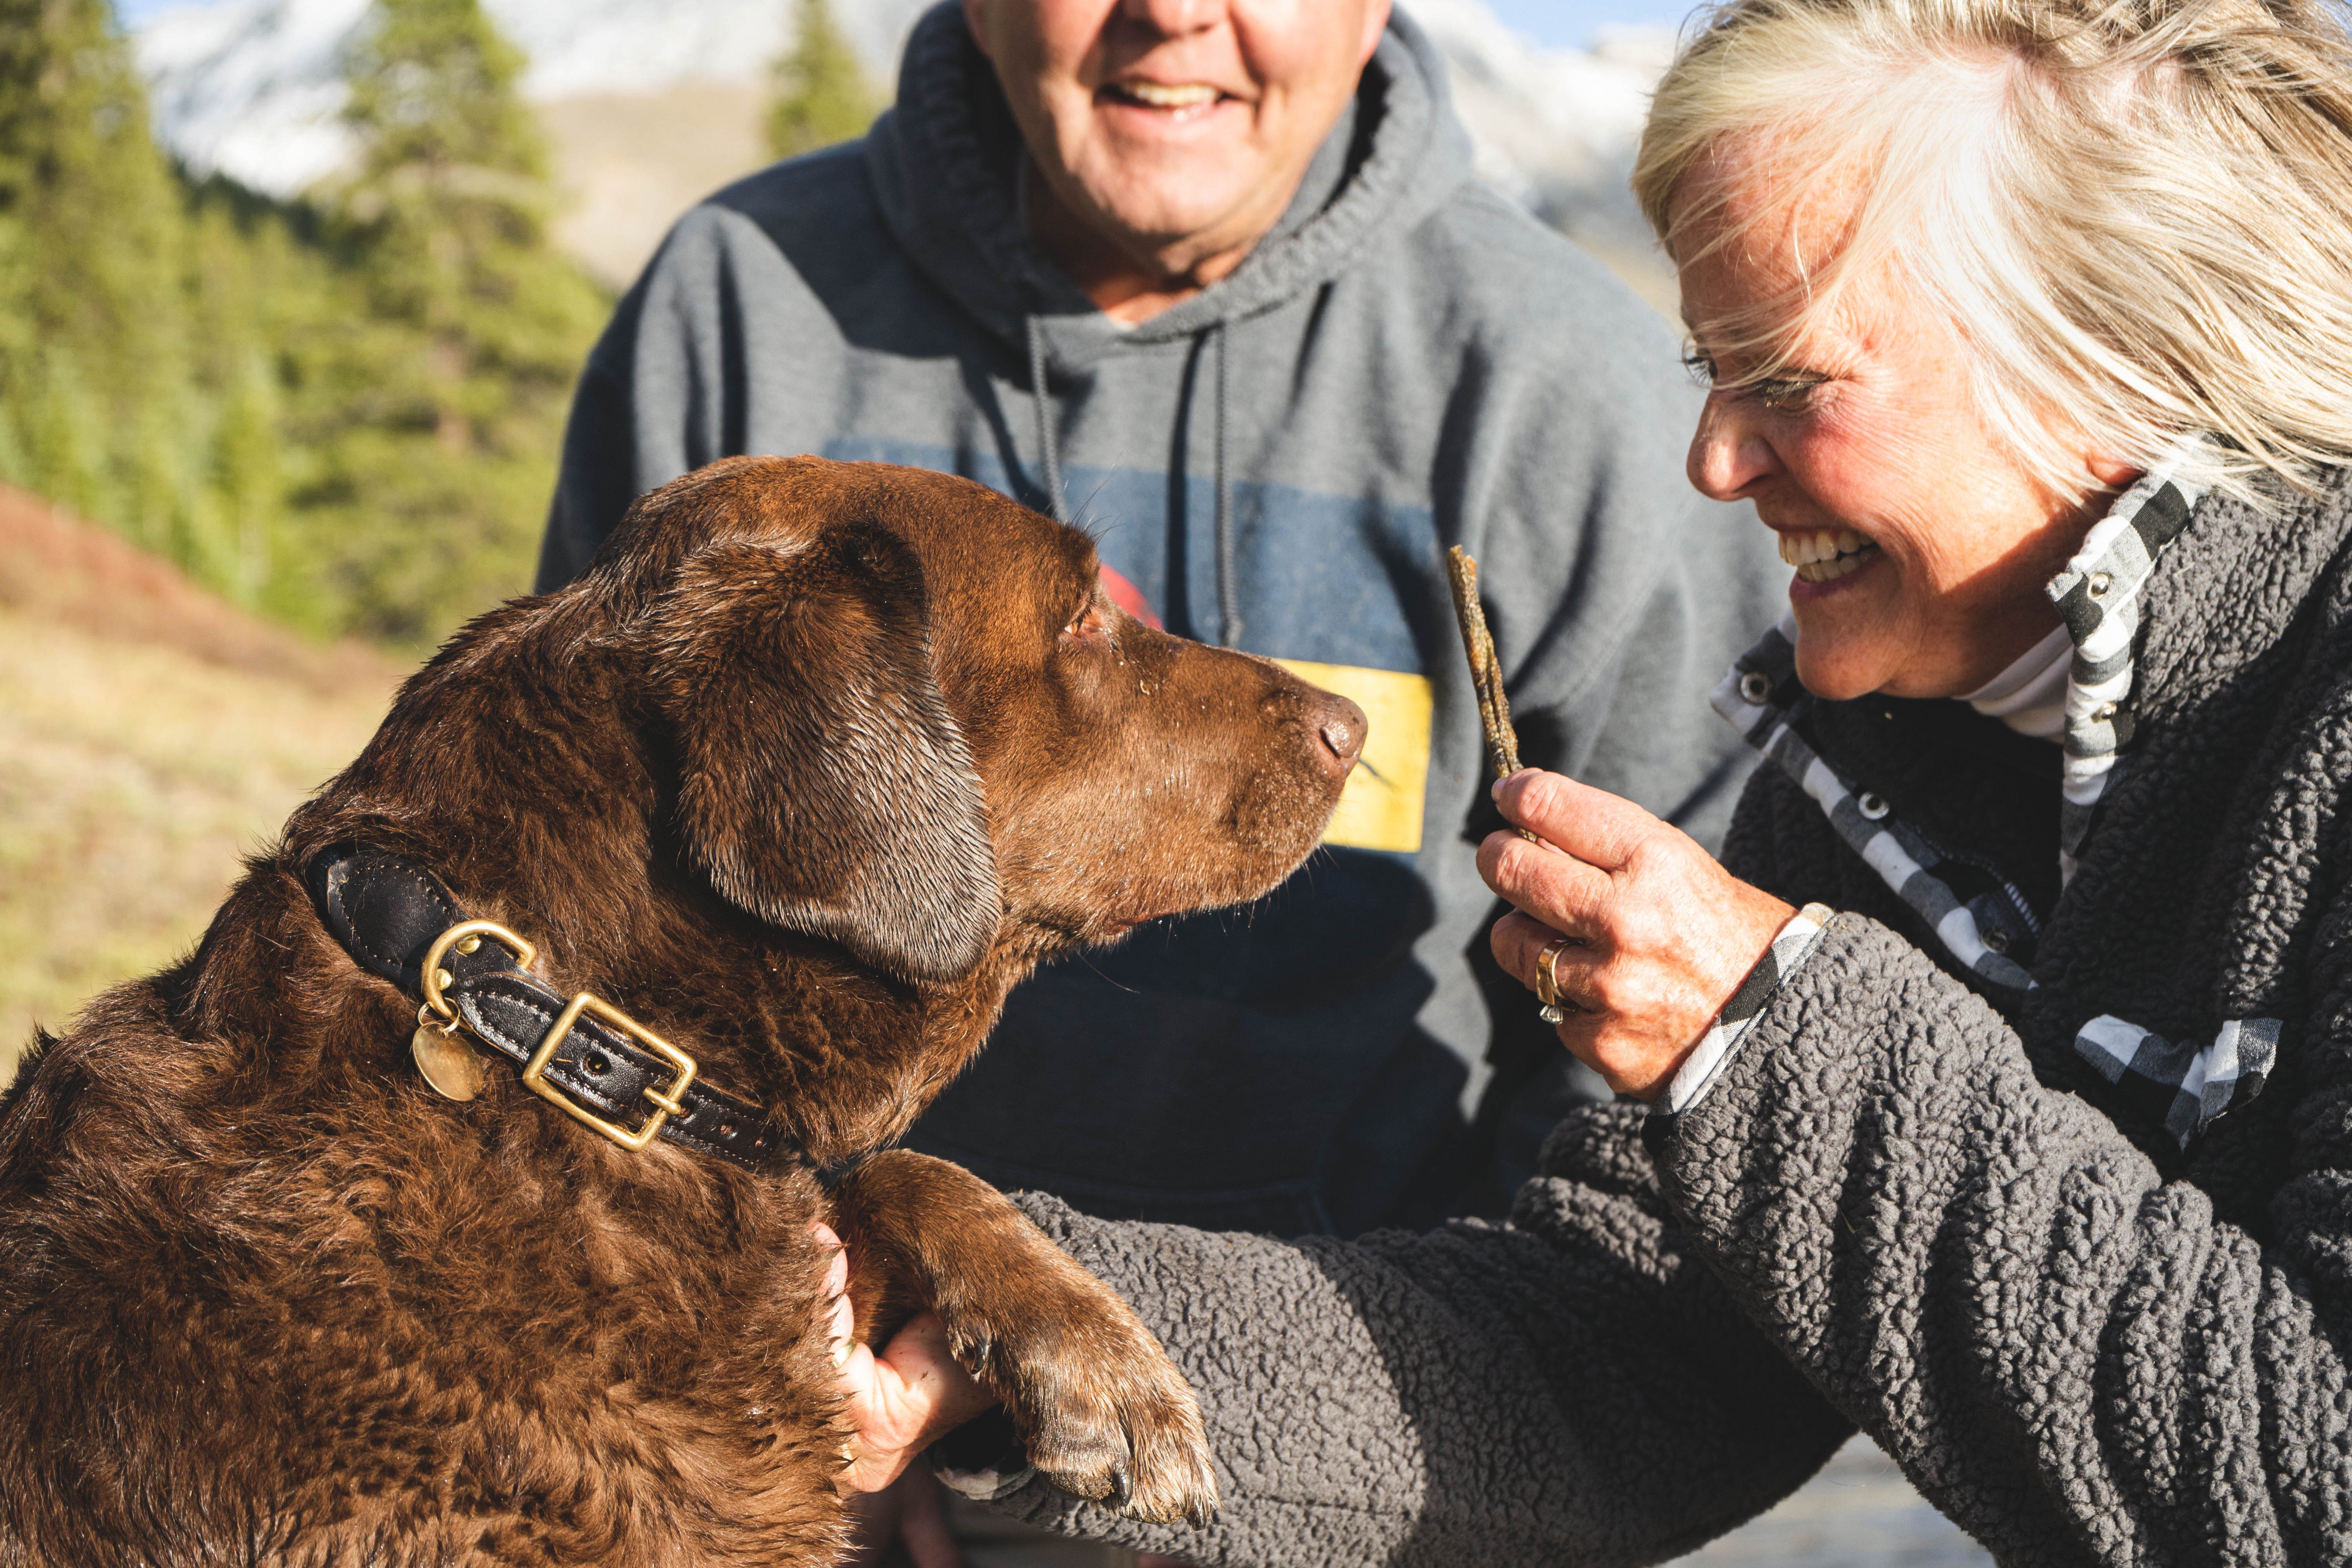 Seniors interact playfully with a dog outside